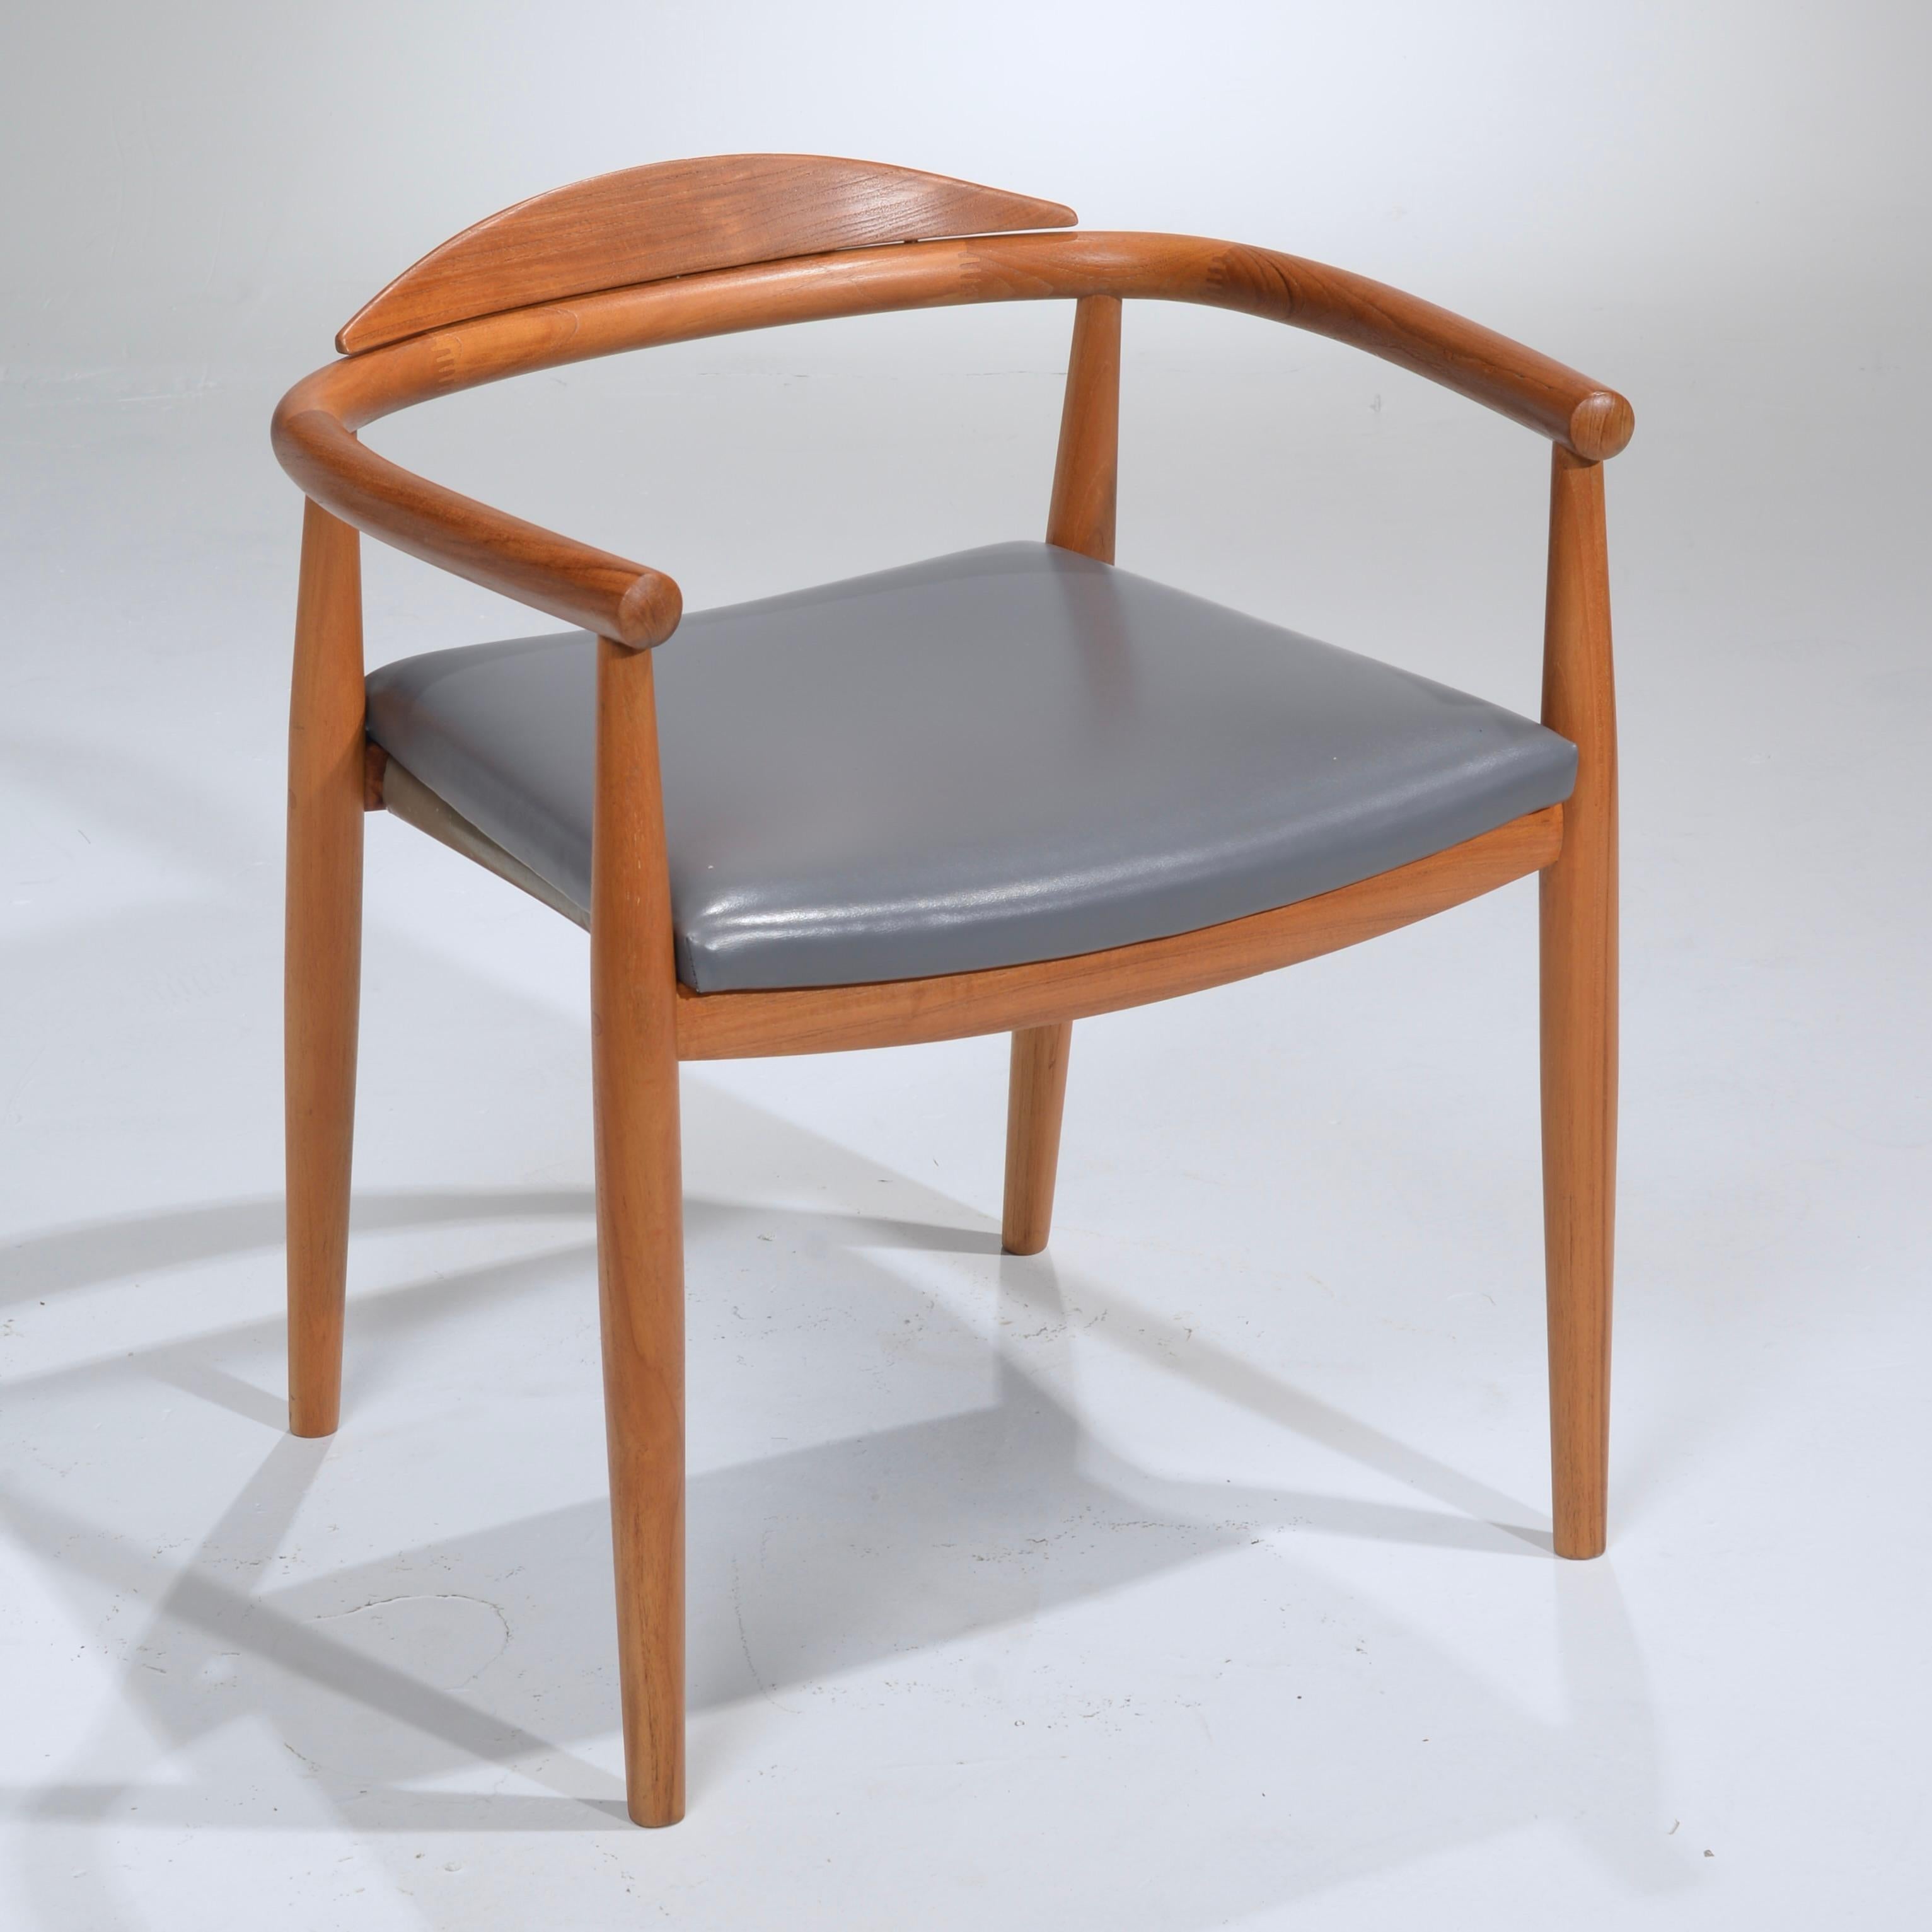 These are great solid teak chairs in the style of Hans Wegner. Made in the USA.
 